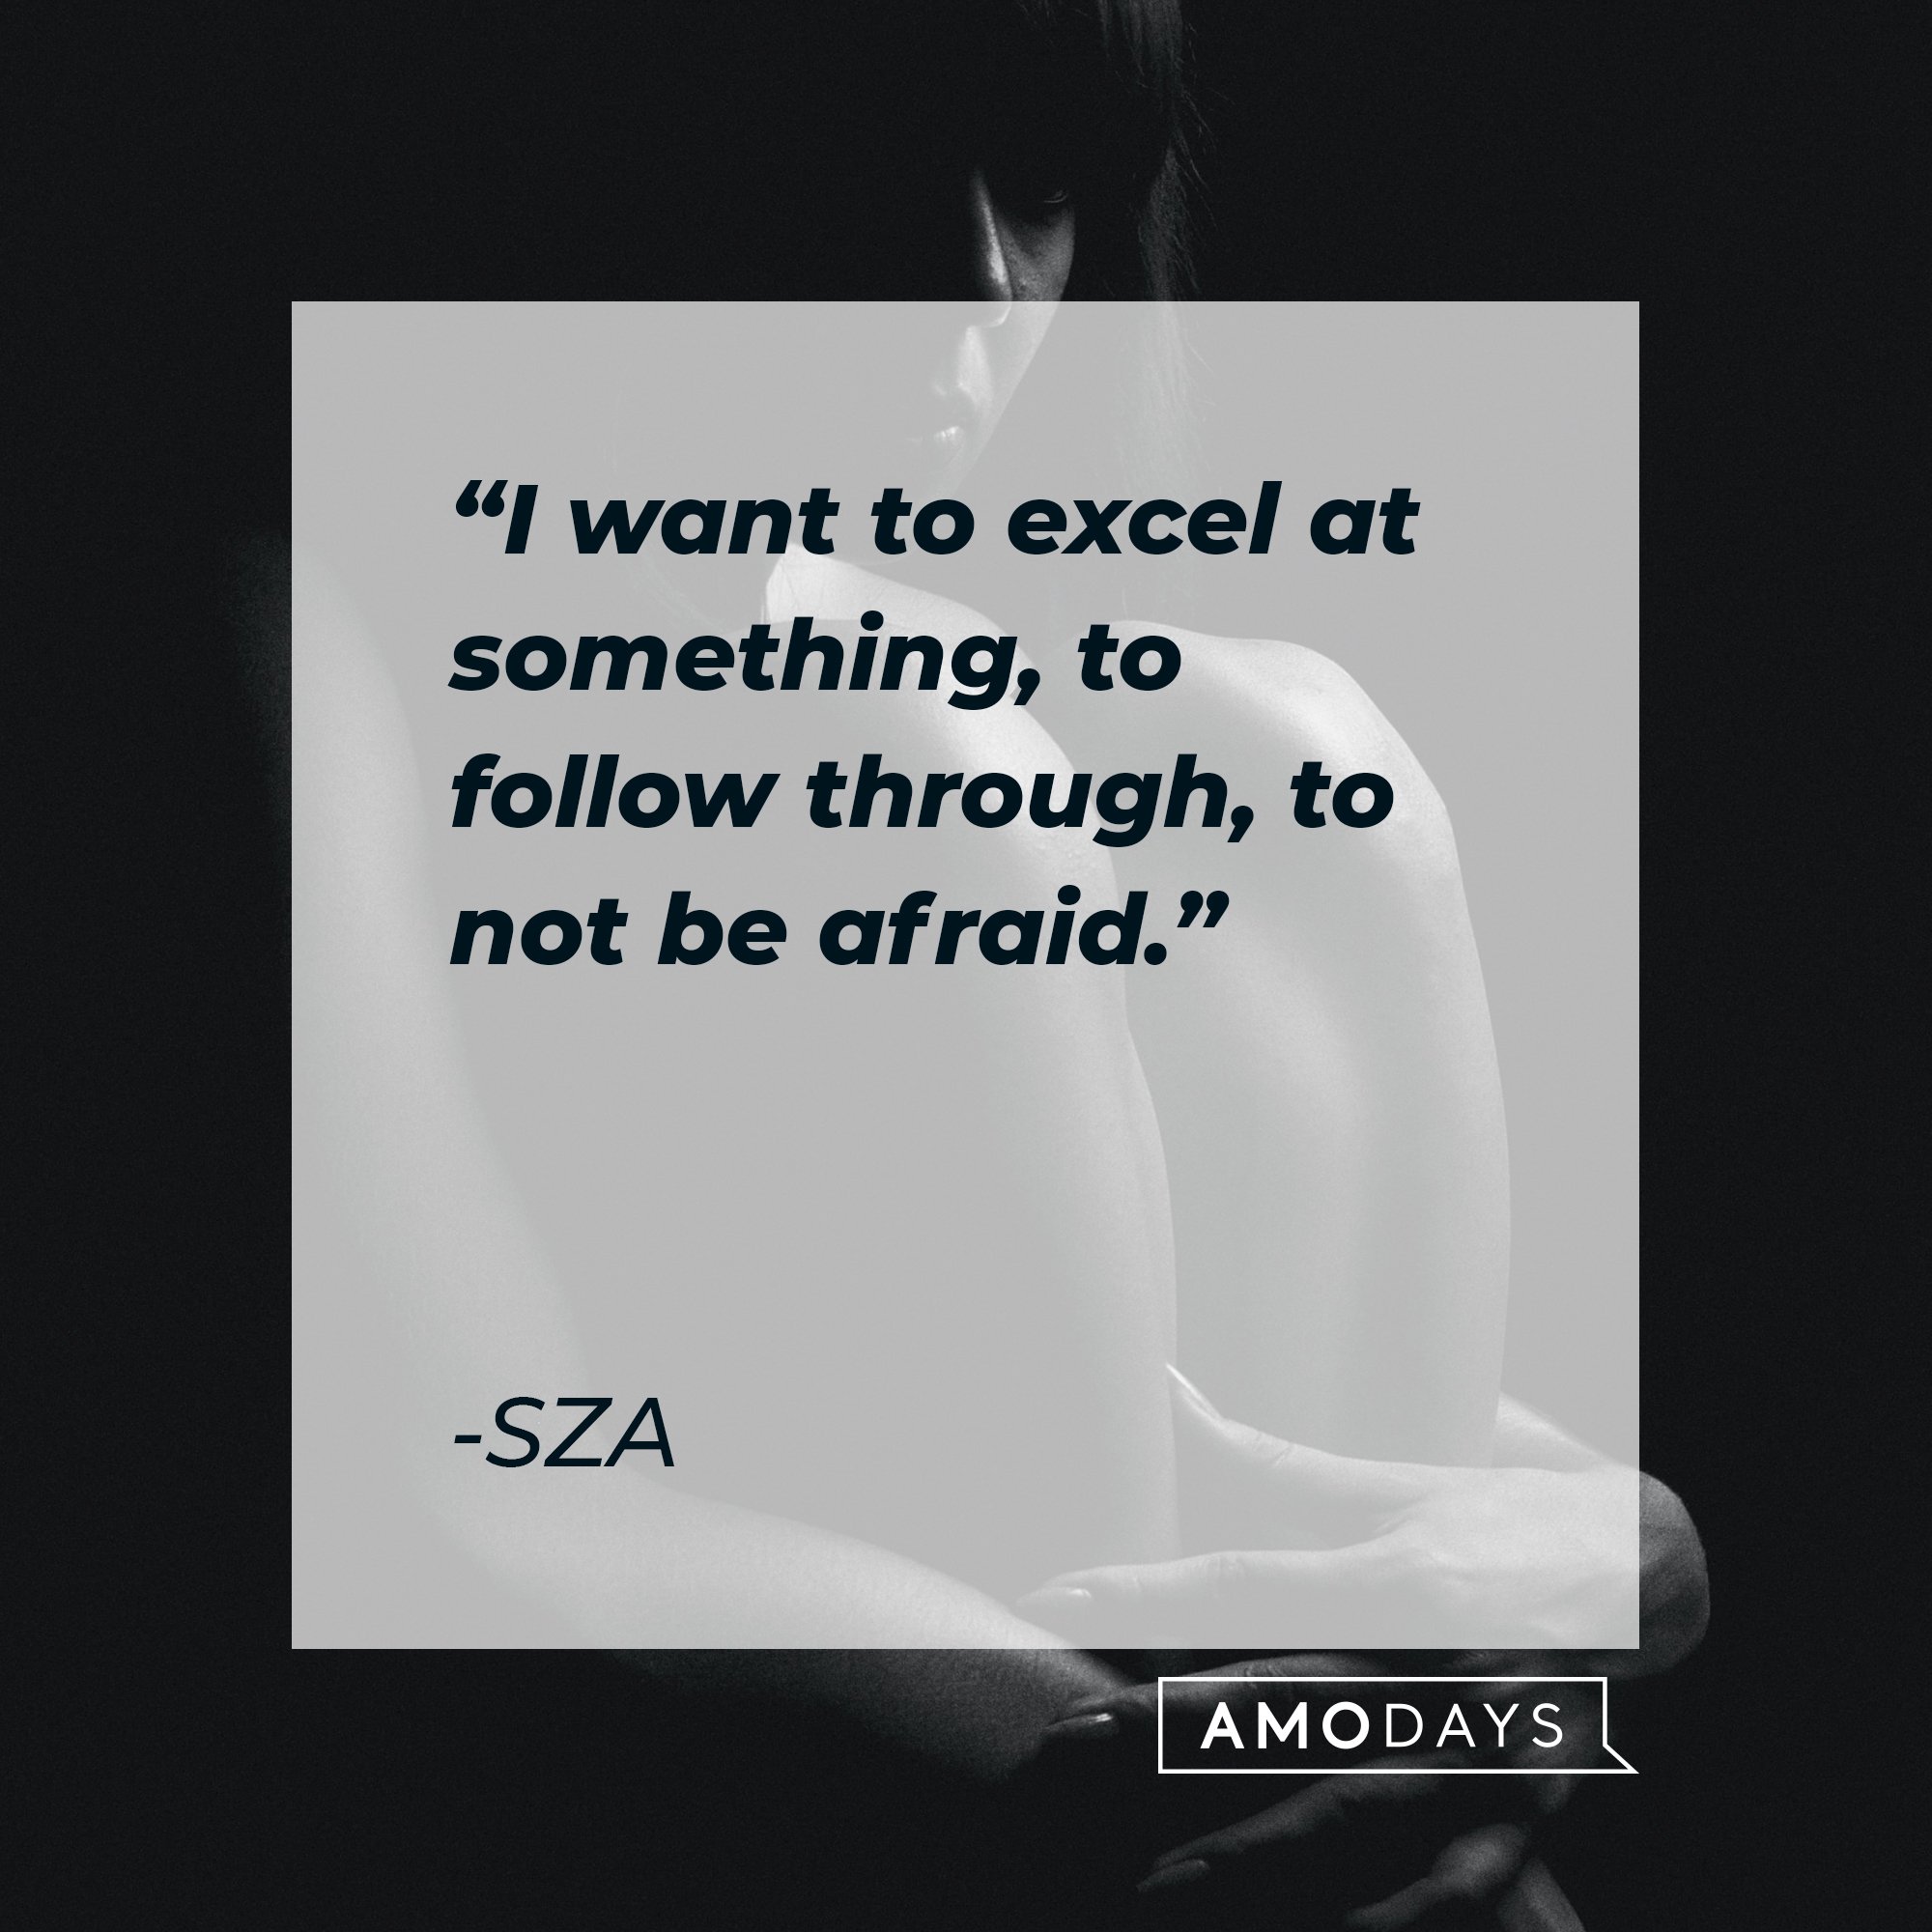 SZA’s quote: "I want to excel at something, to follow through, to not be afraid." | Image: AmoDays